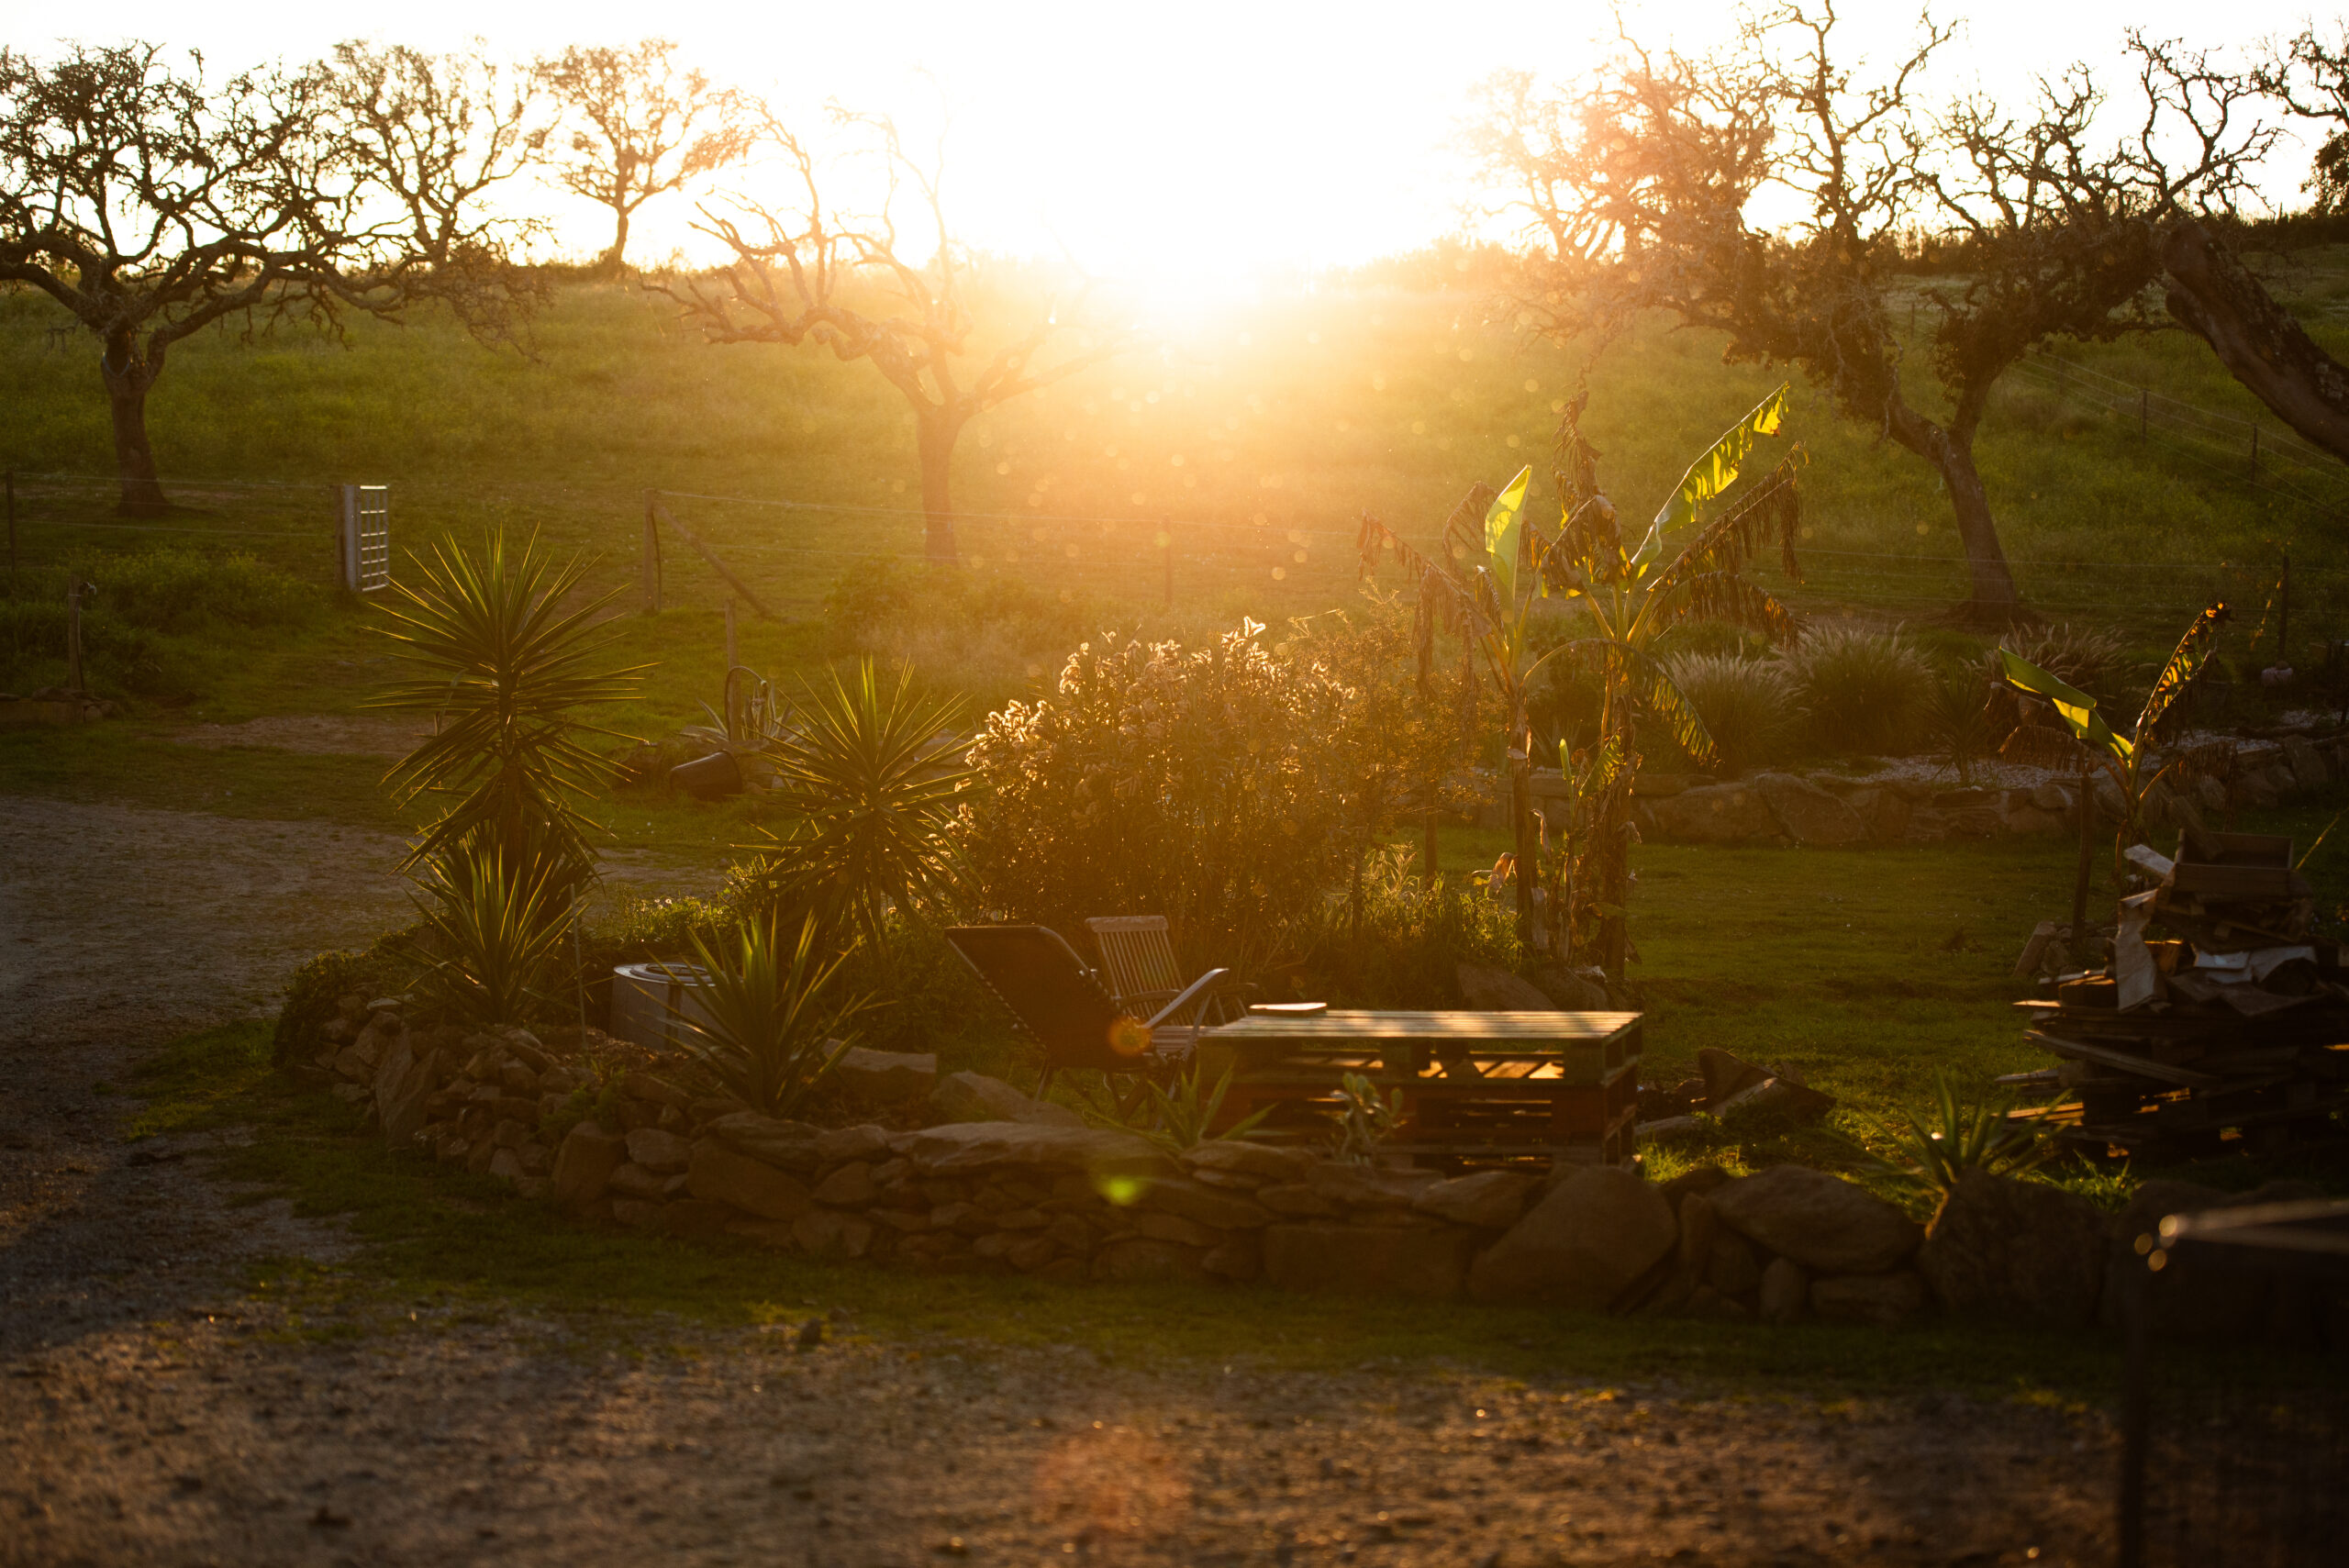 Part of the garden at Equus Ourique in the evening sun